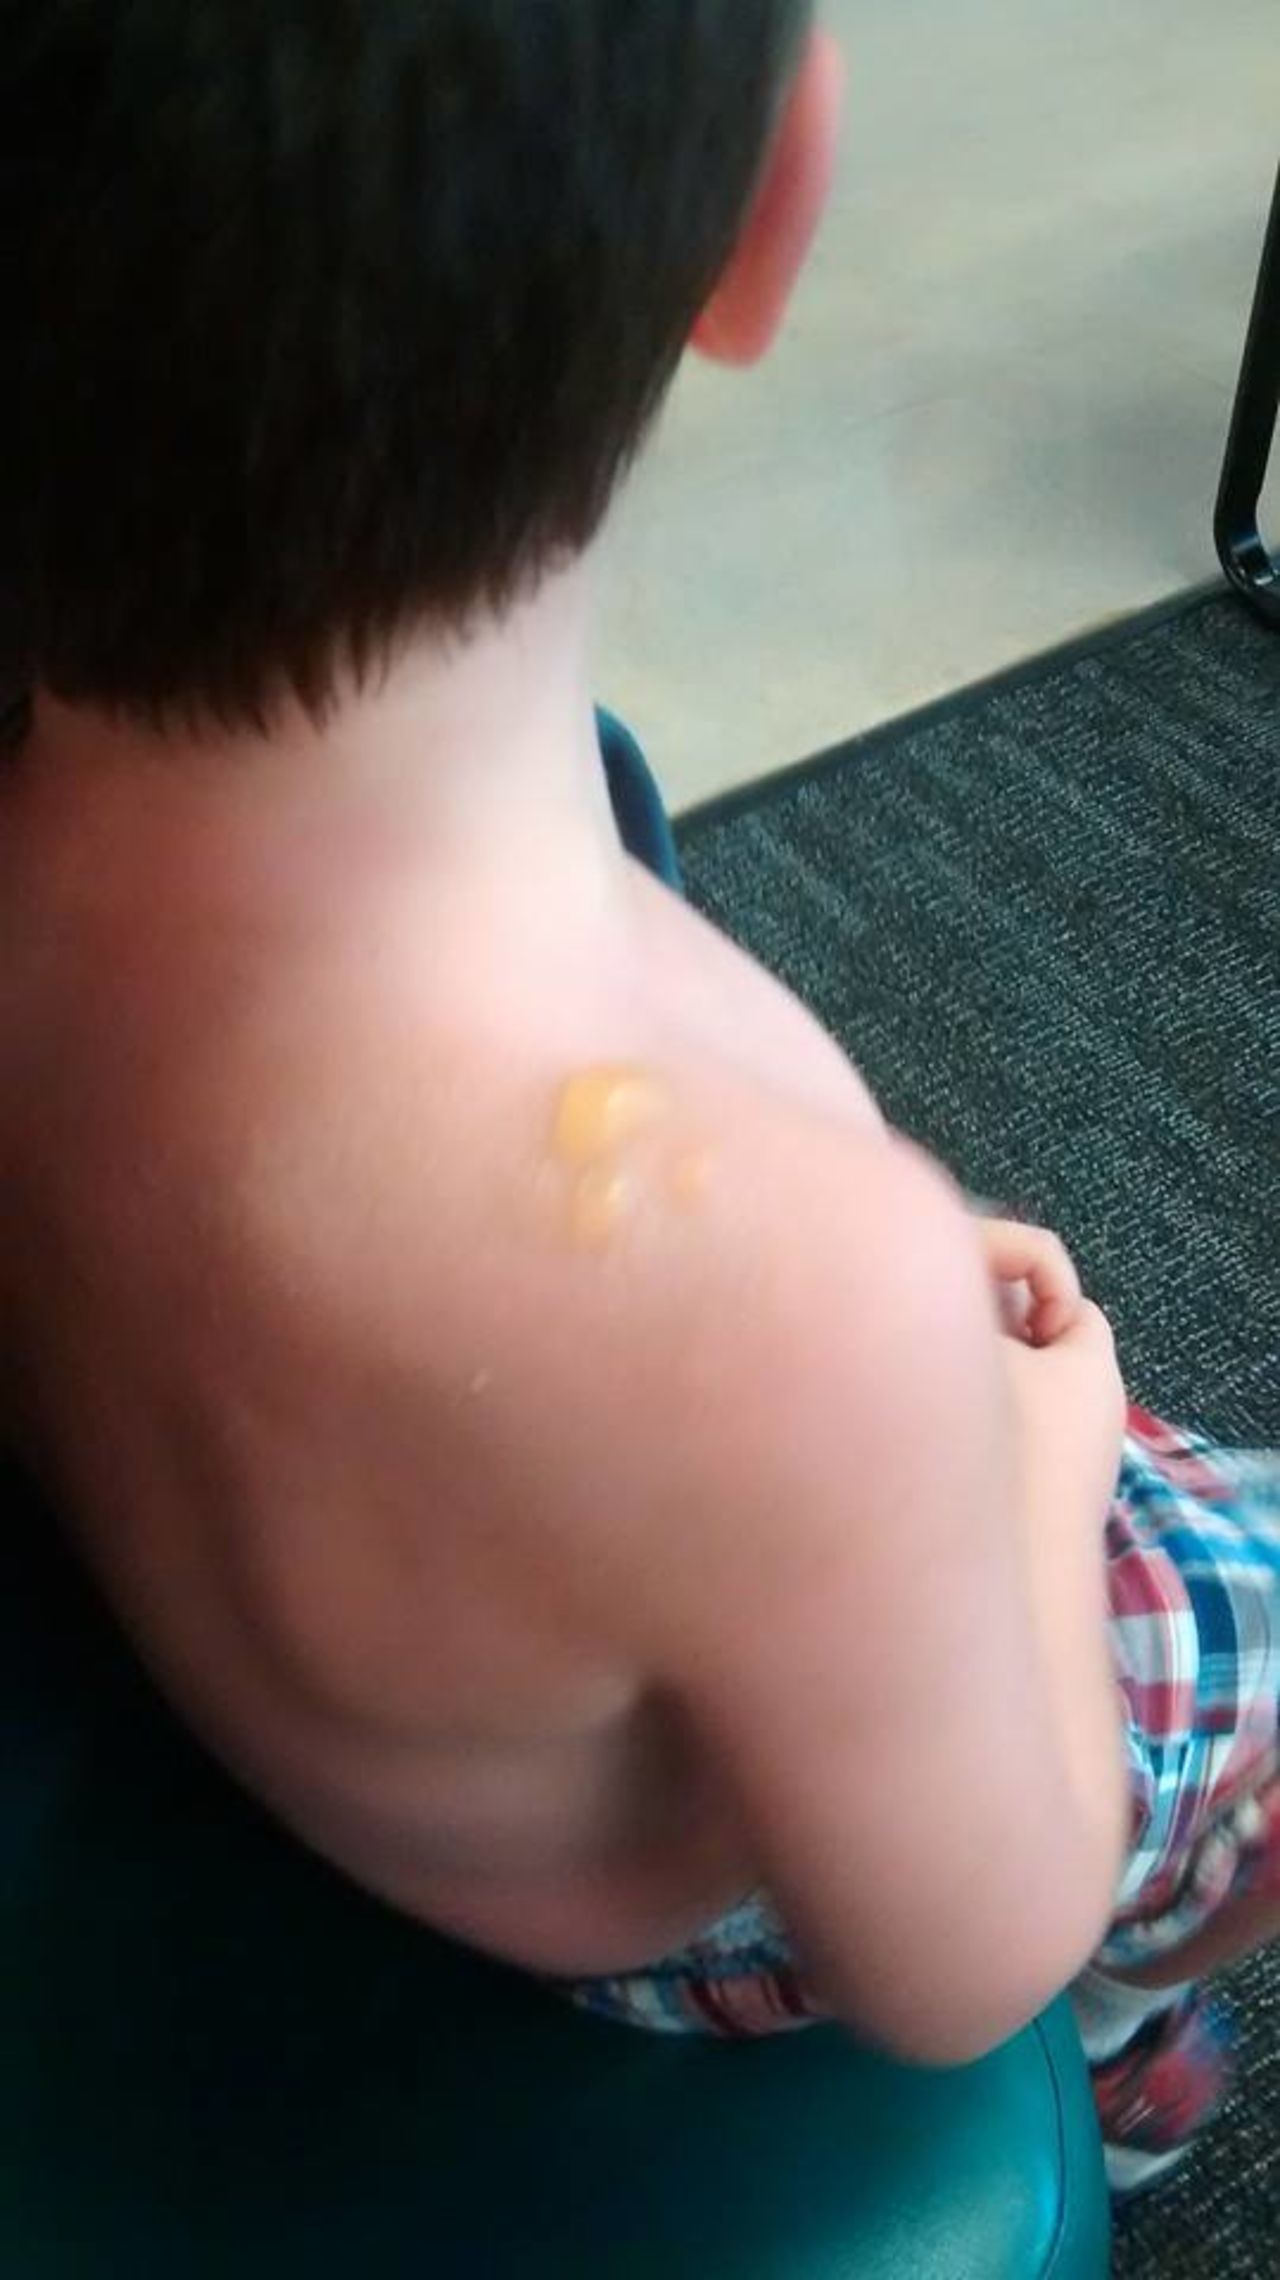 Trae Broadway suffered from second degree burns, resulting in small blisters on his shoulders and back. 